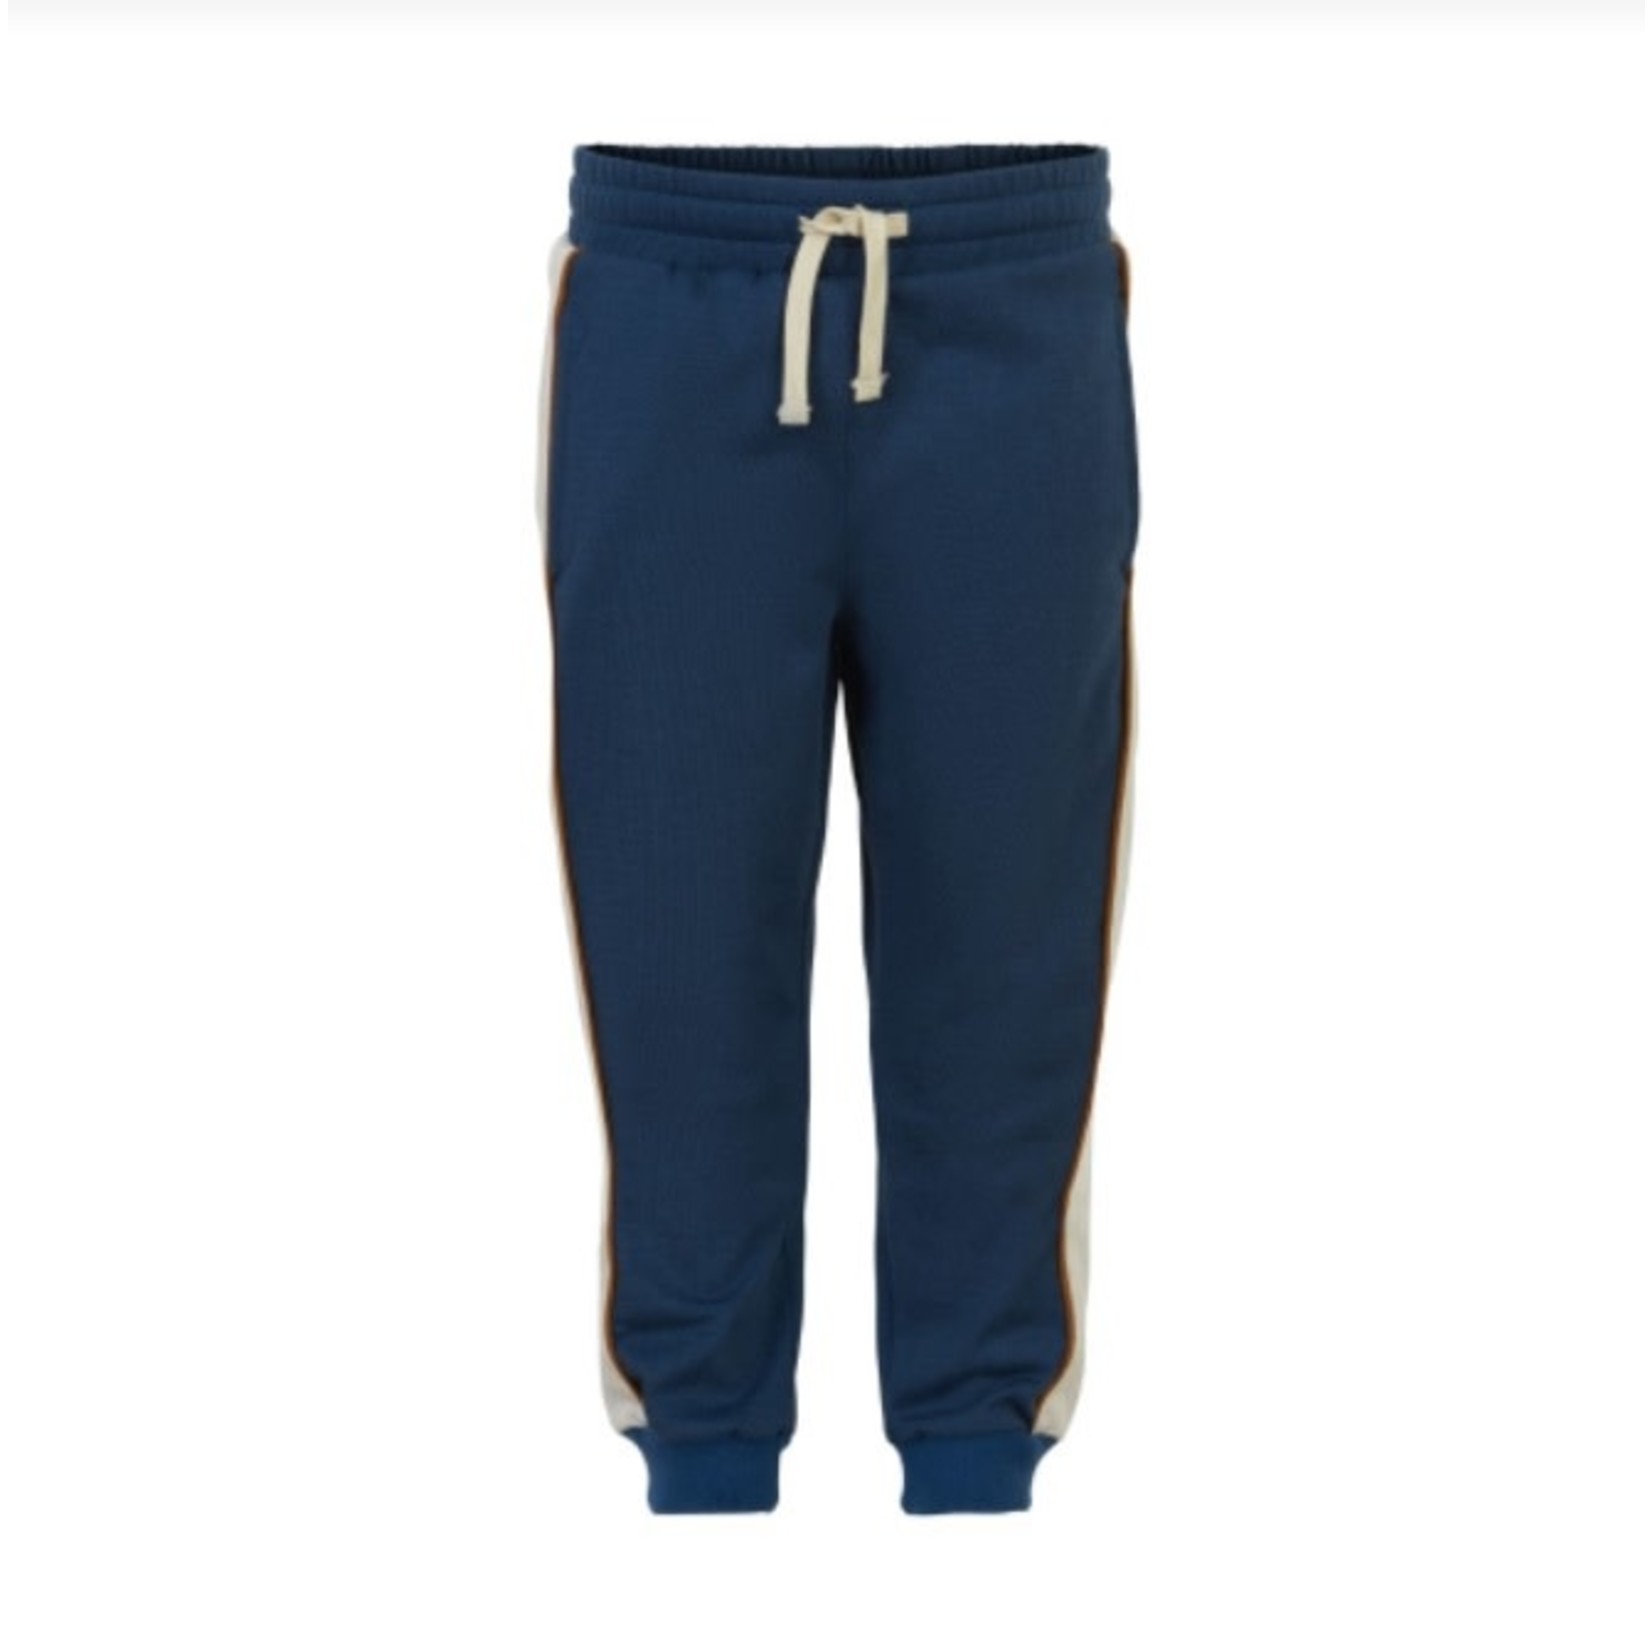 Minymo MINYMO- Navy blue jogging pants with retro off-white and caramel stripe